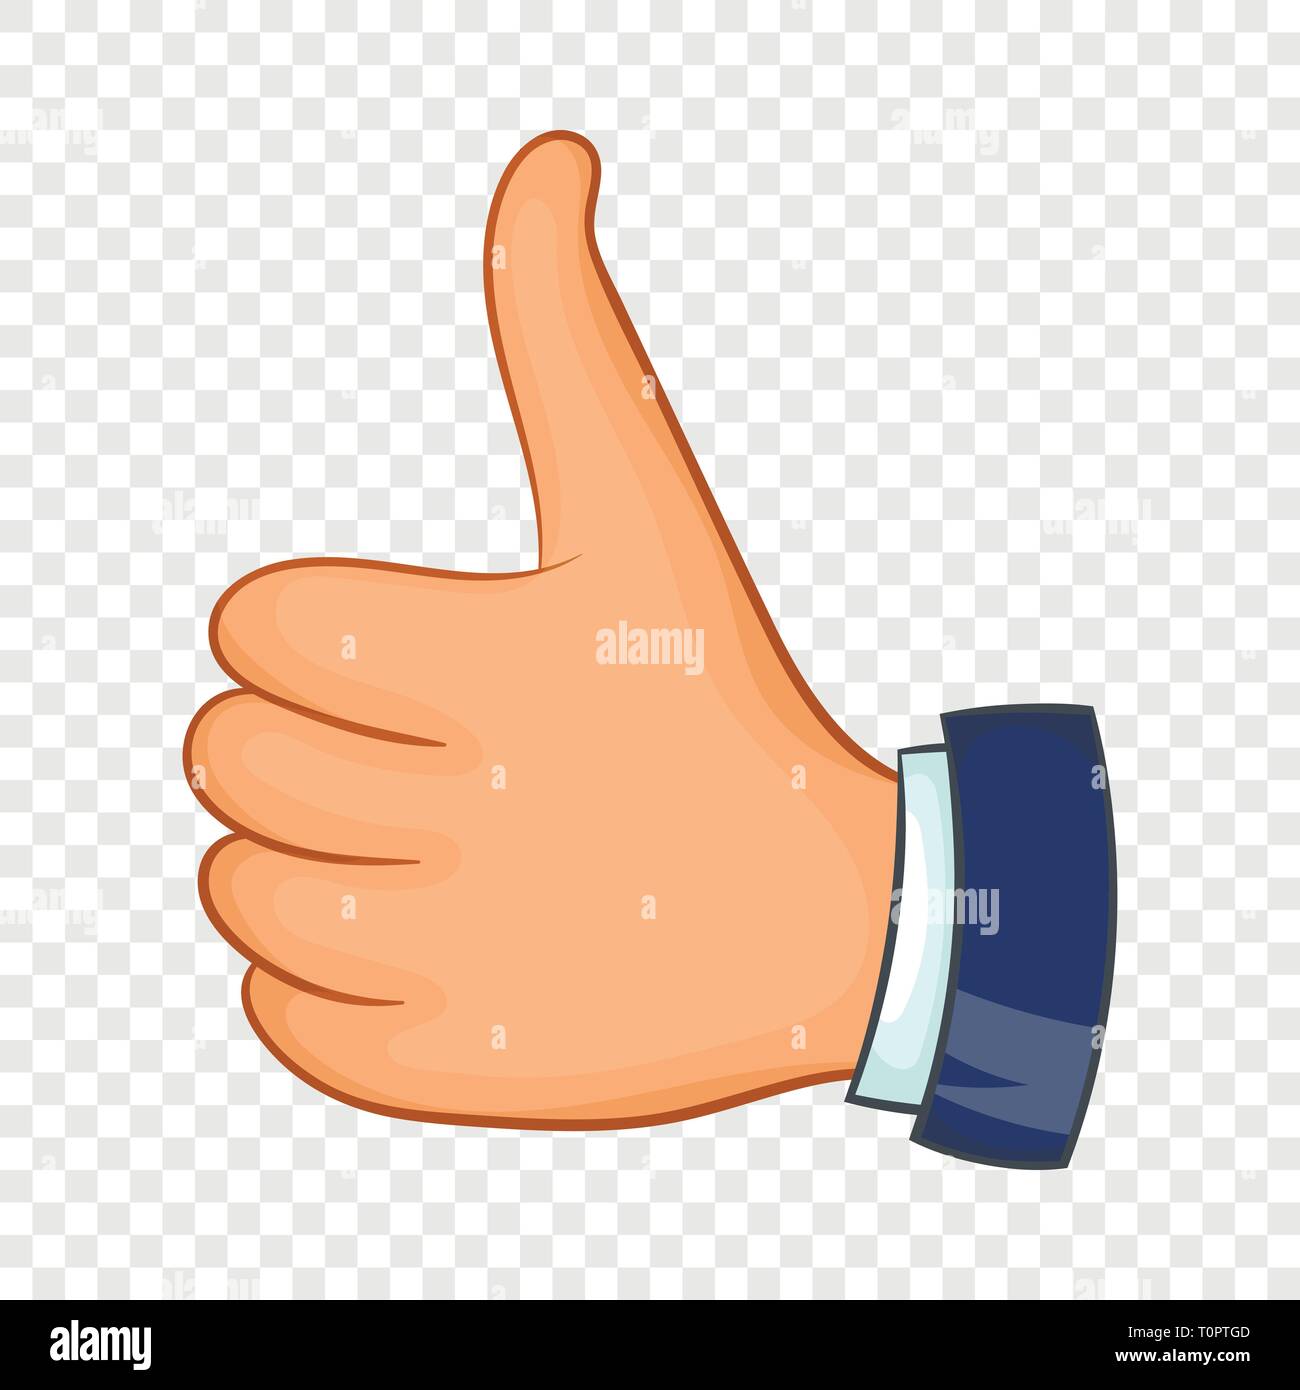 Hand with thumb up icon, cartoon style Stock Vector